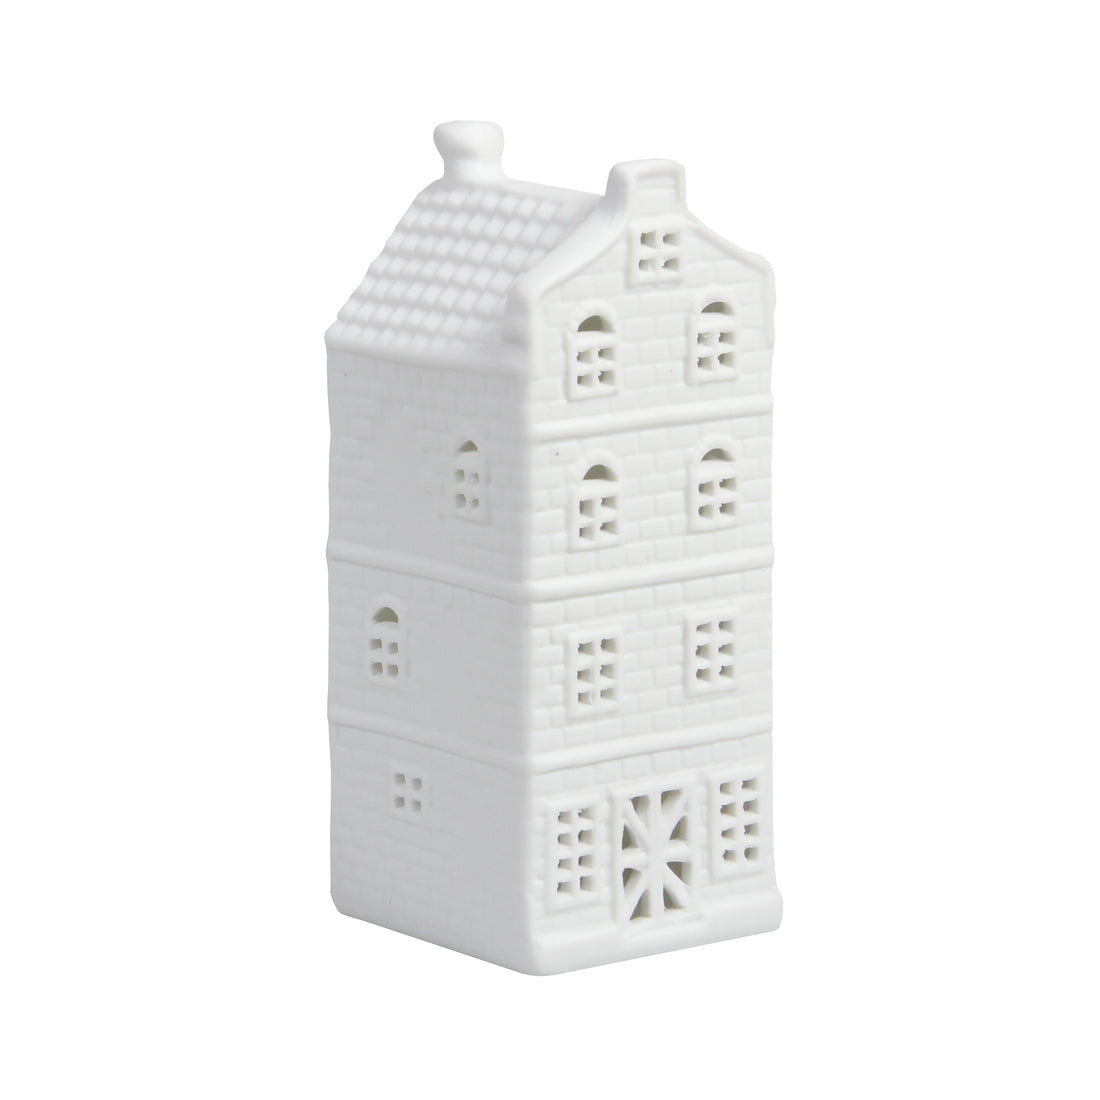 WHITE AMSTERDAM CANAL HOUSE TEALIGHT HOLDER | SPOUT GABLE